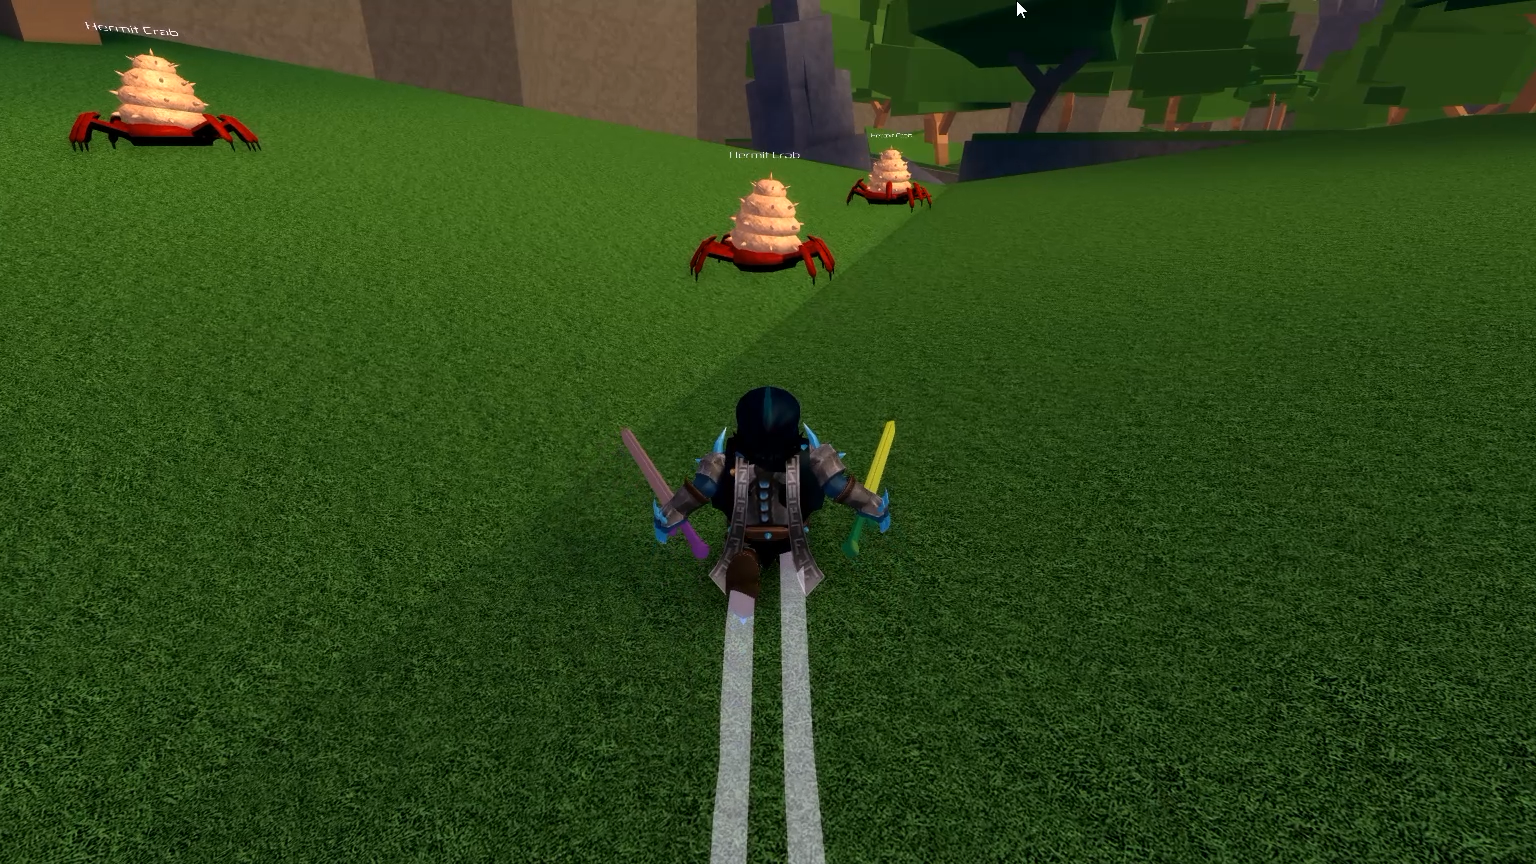 Fly, Swing, and Smash to Save the Day in the Roblox Heroes Event - Xbox Wire